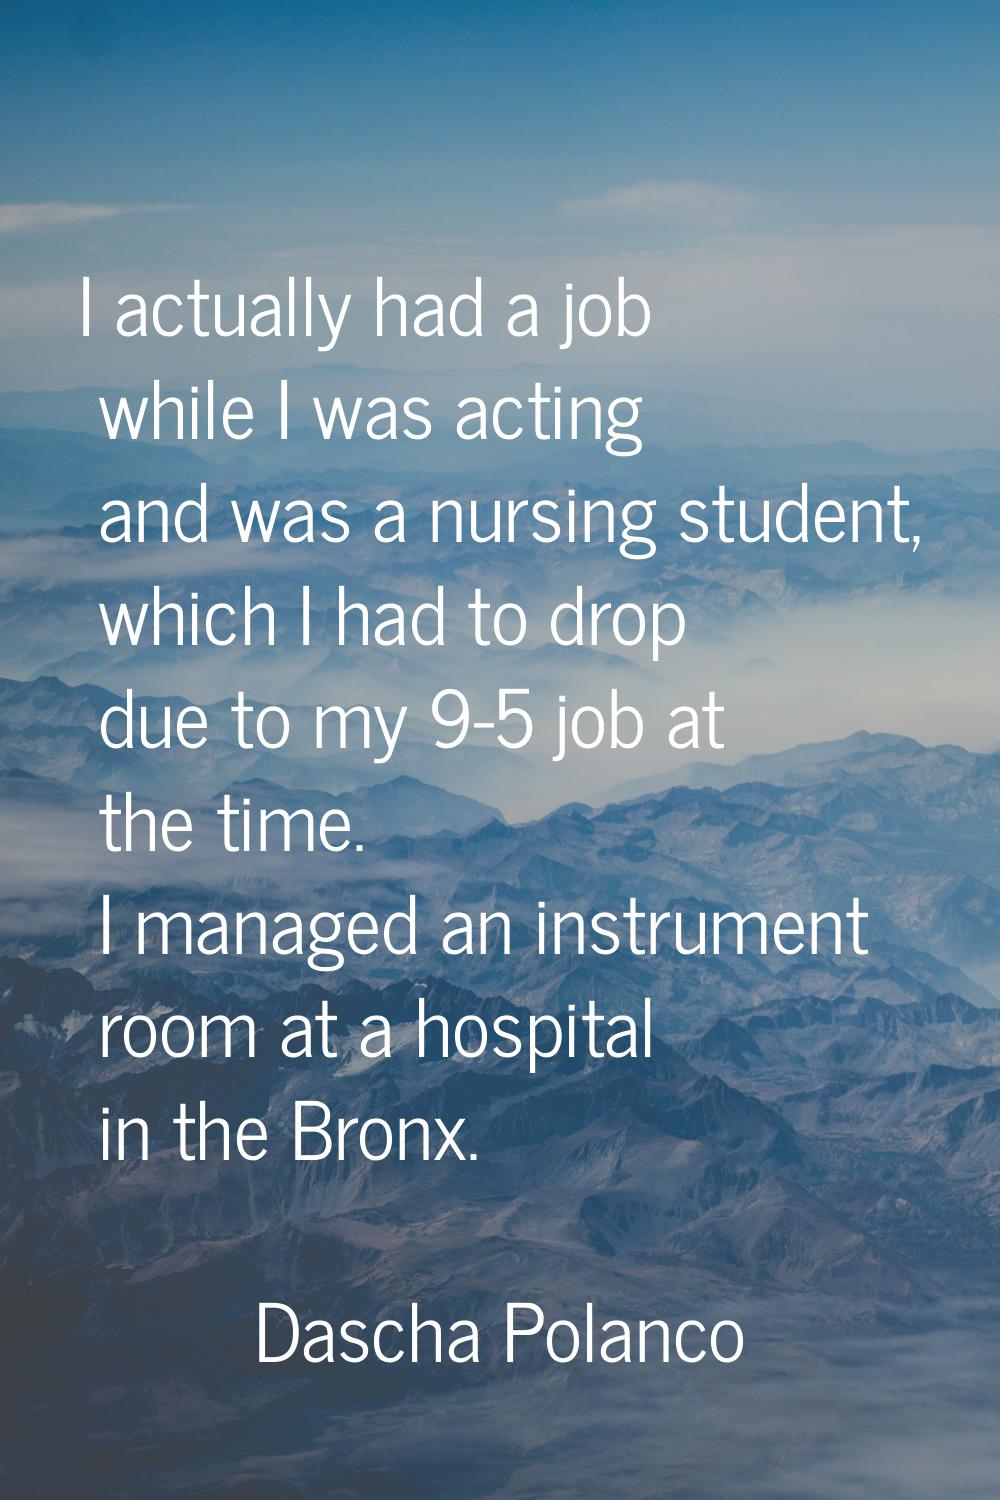 I actually had a job while I was acting and was a nursing student, which I had to drop due to my 9-